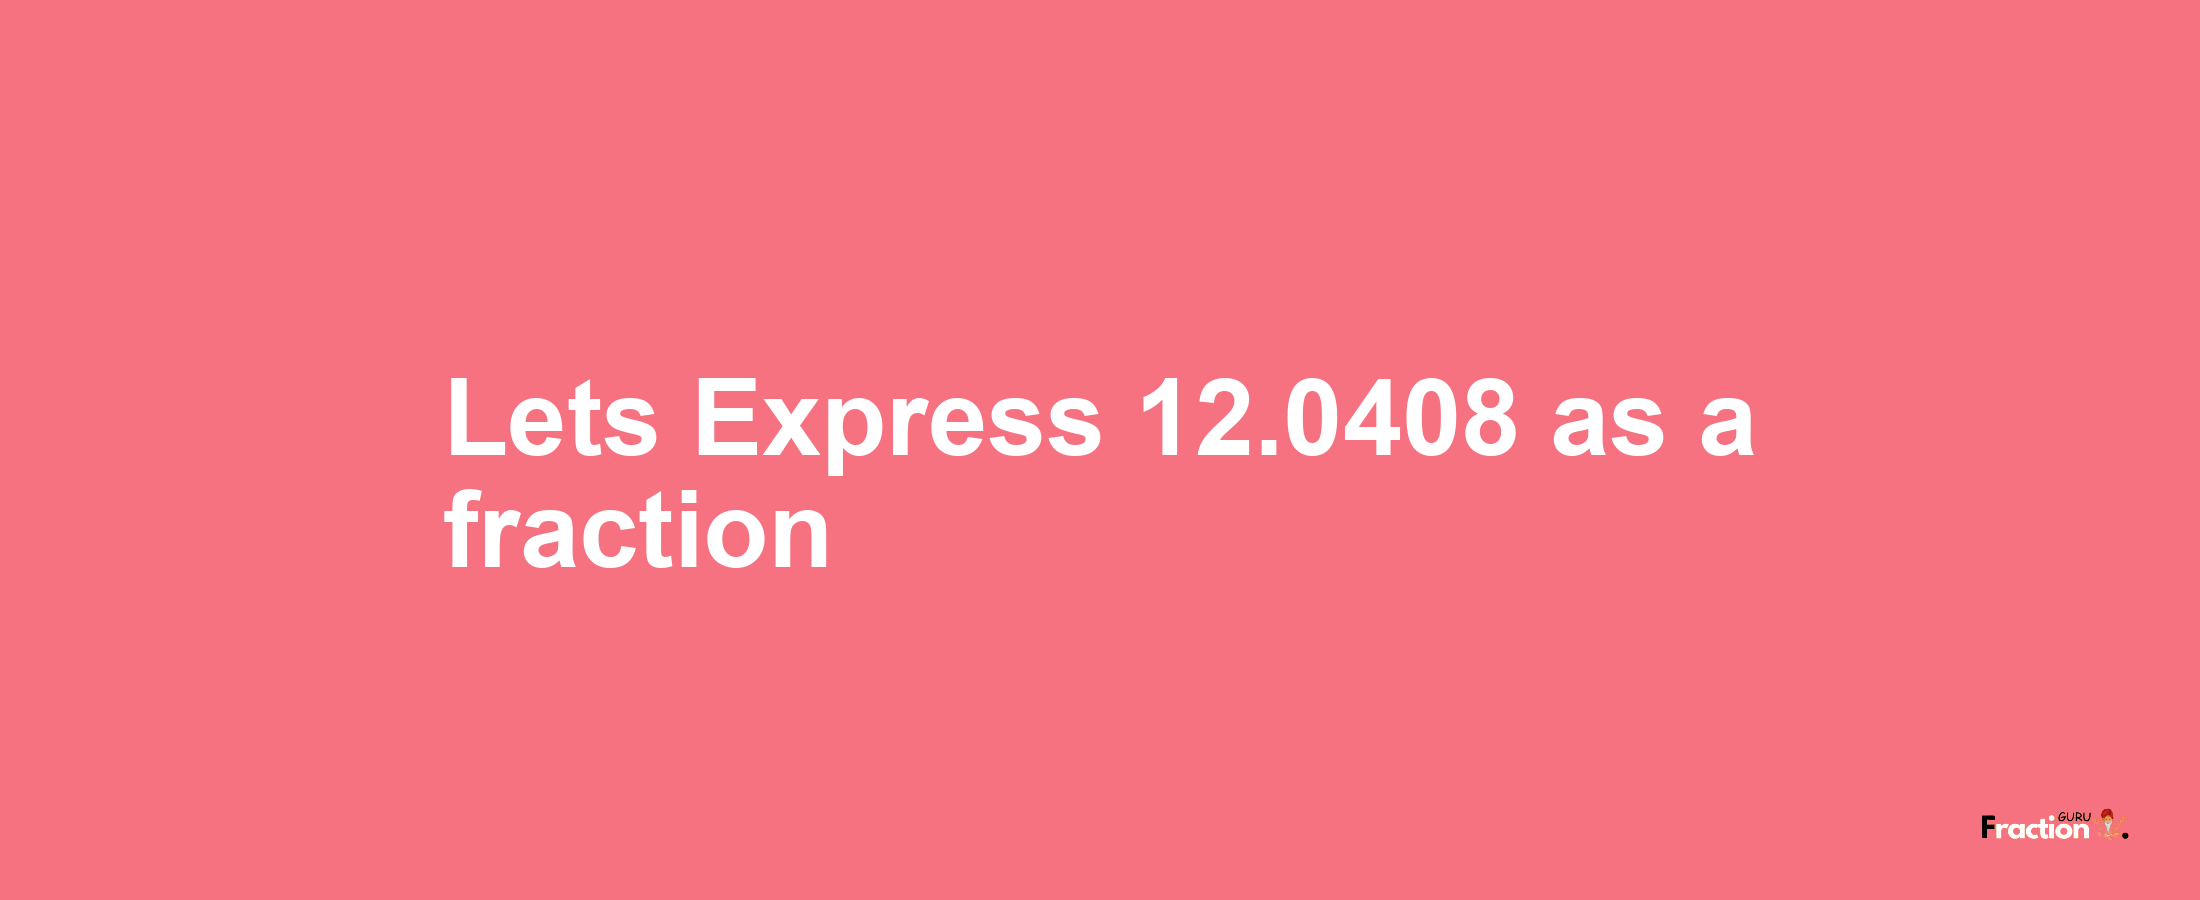 Lets Express 12.0408 as afraction